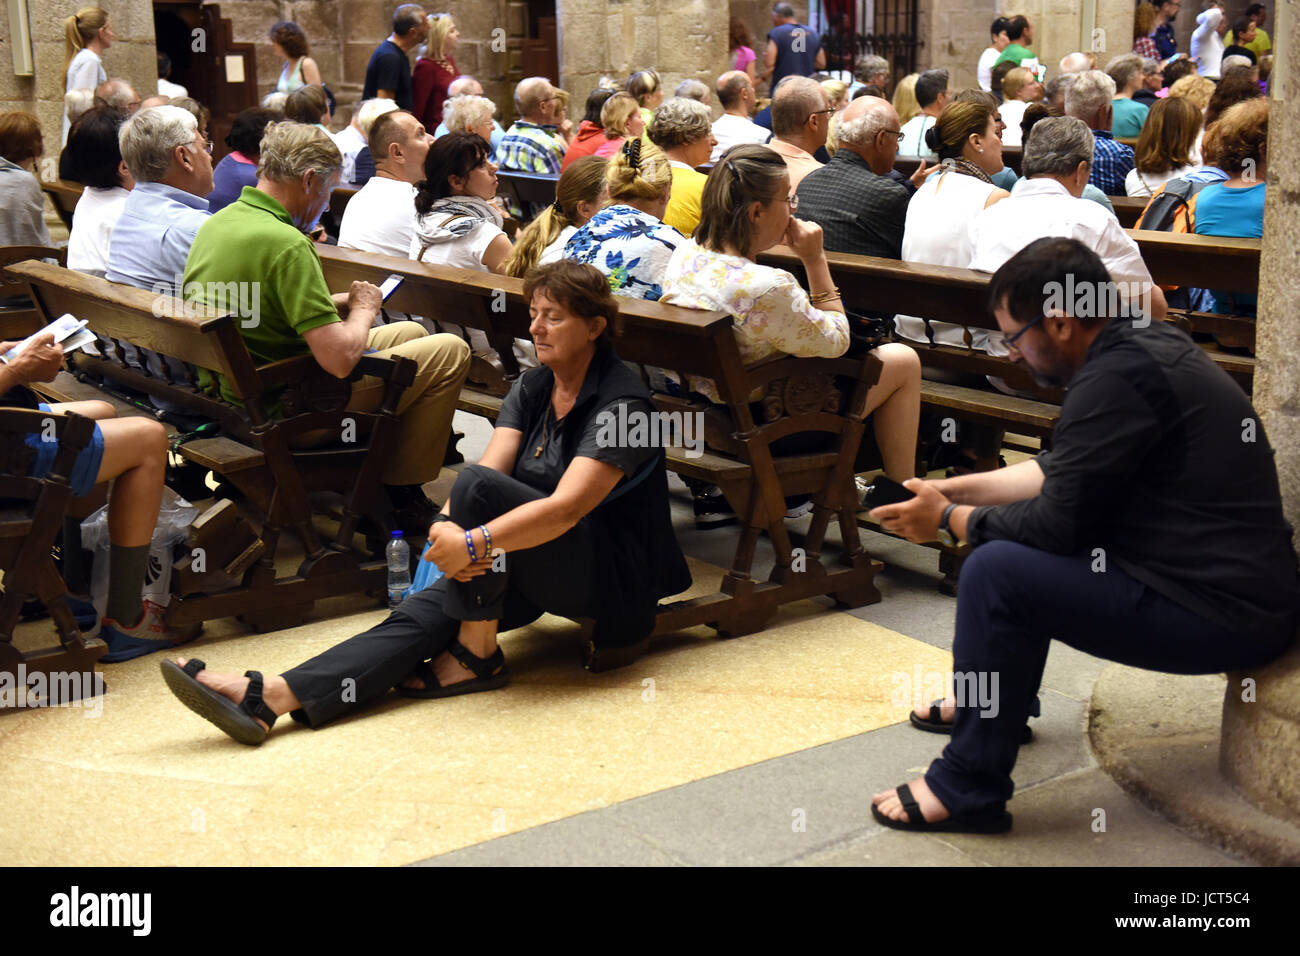 Christian worshippers and visitors waiting for Pilgrims Mass to start at Cathedral of Santiago de Compostela in Spain. Stock Photo